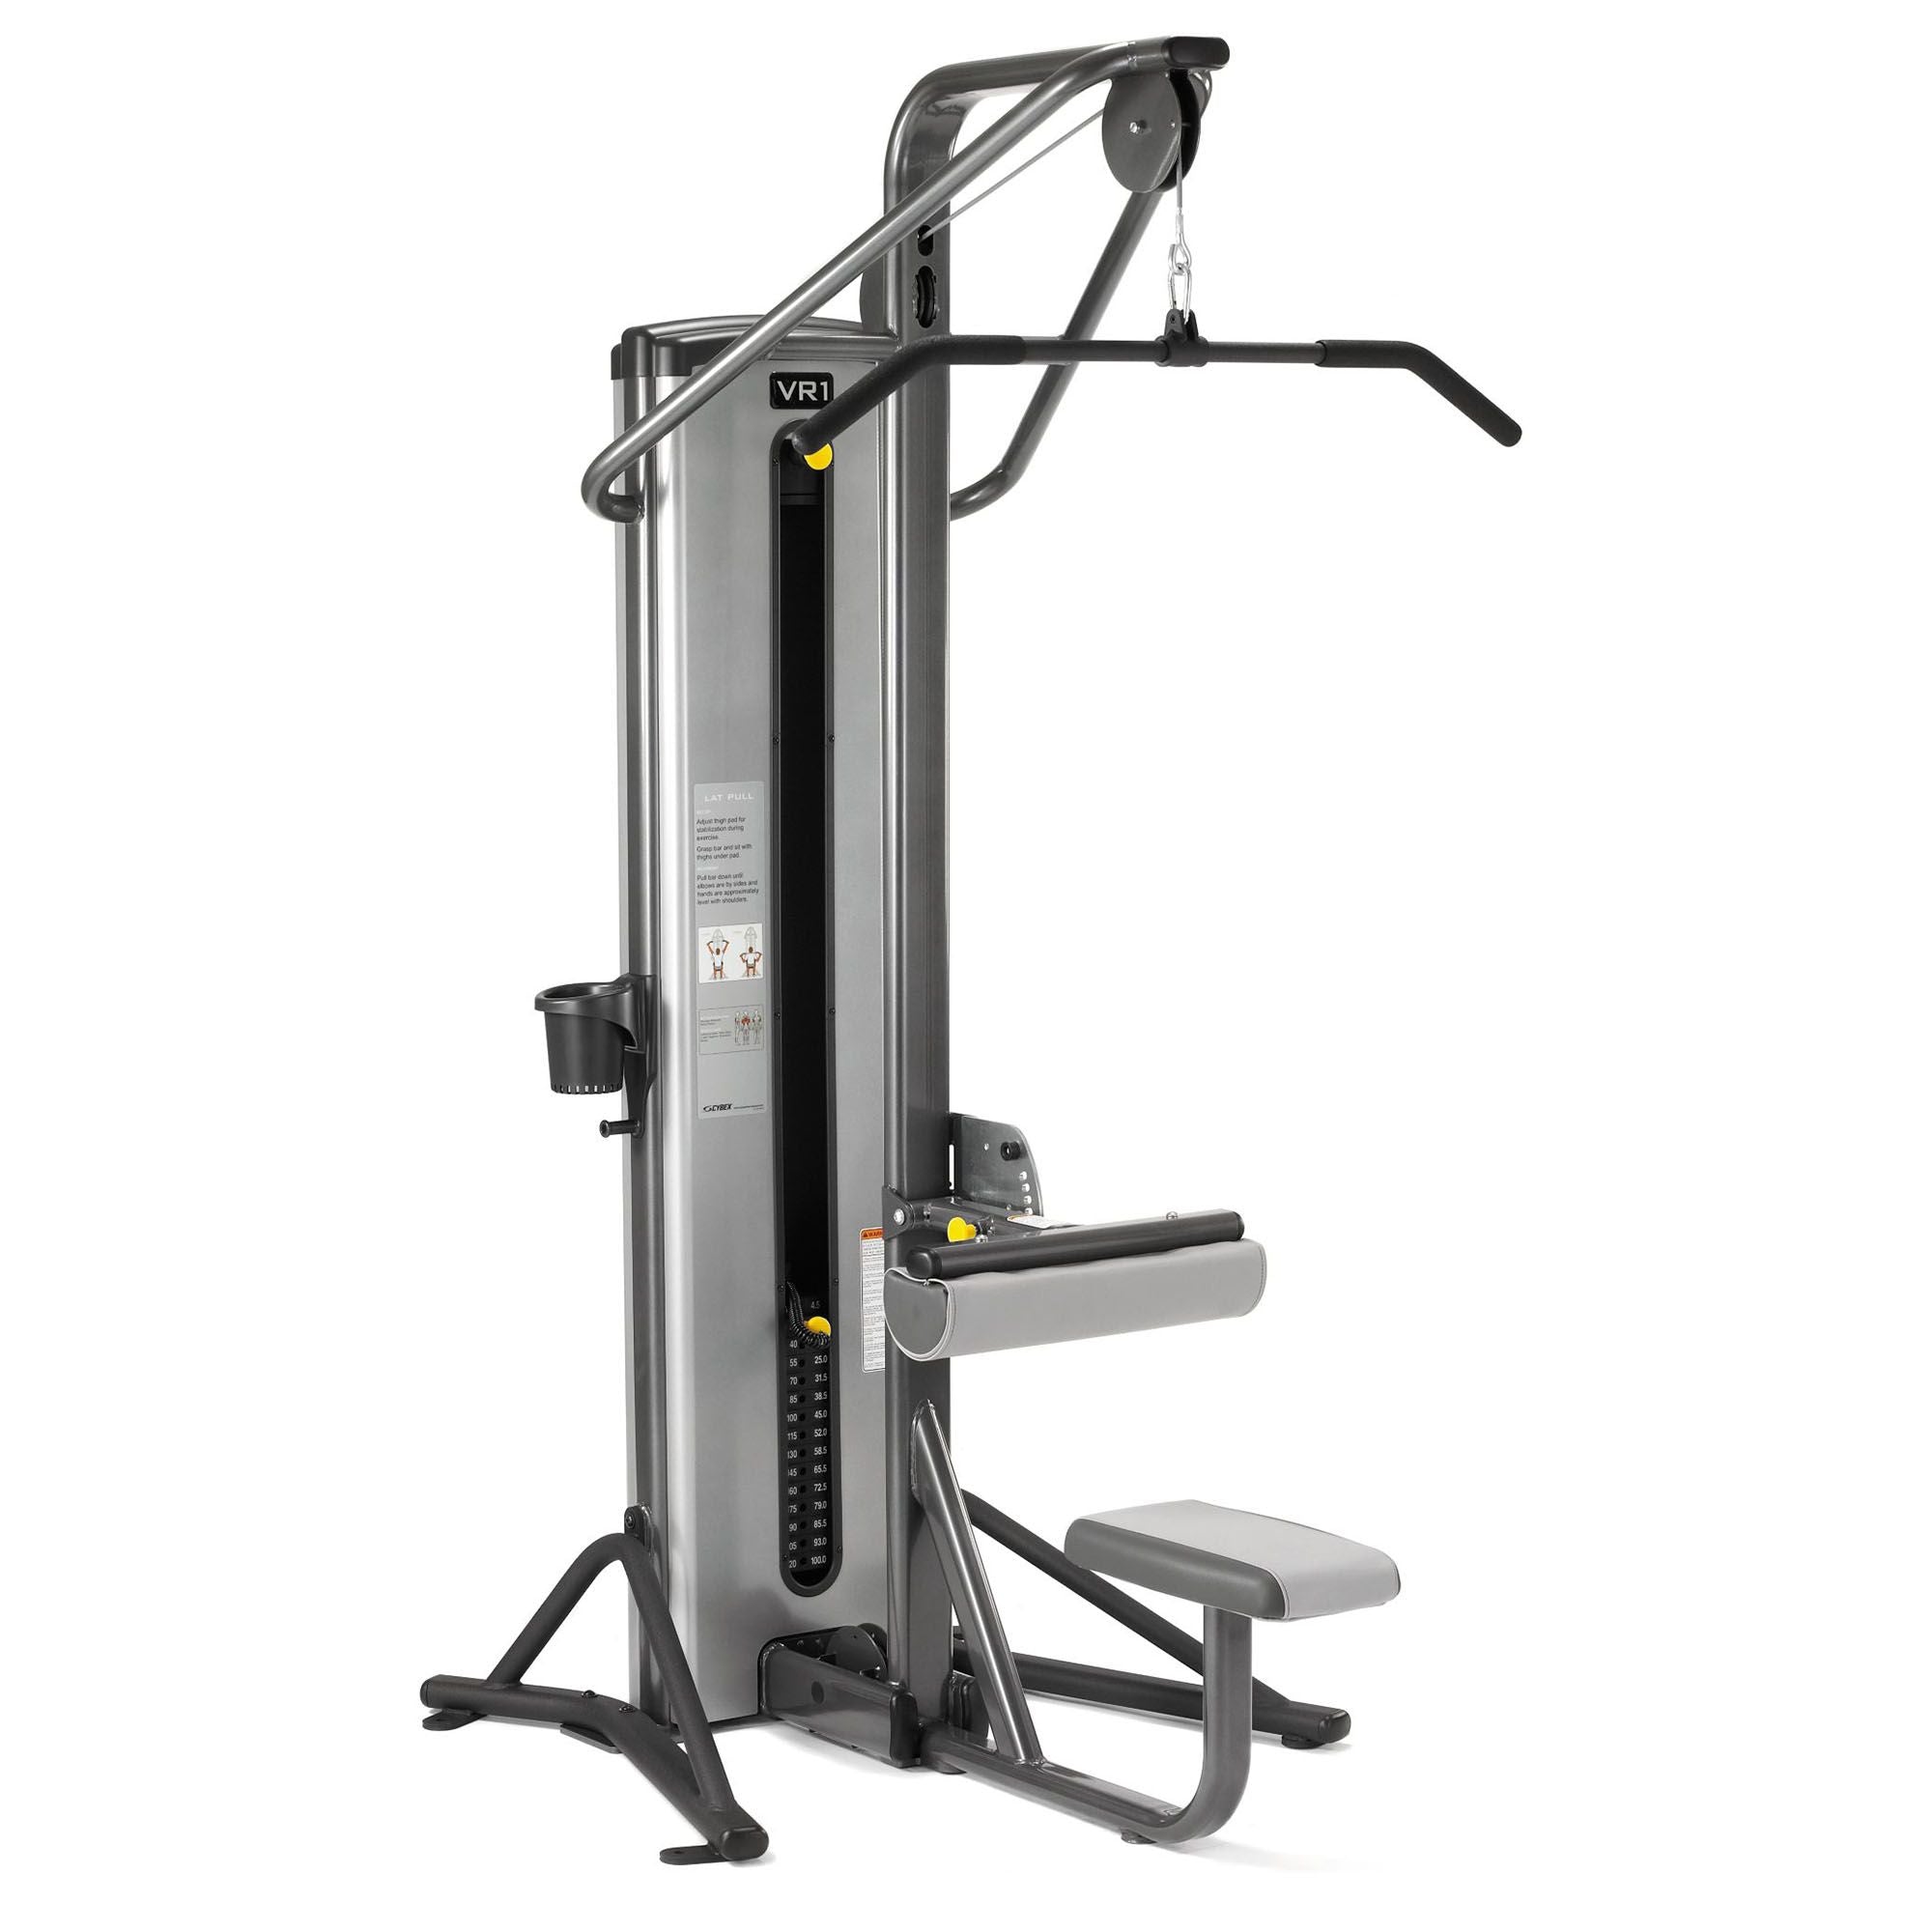 Used Cybex VR1 Lat Pull Down